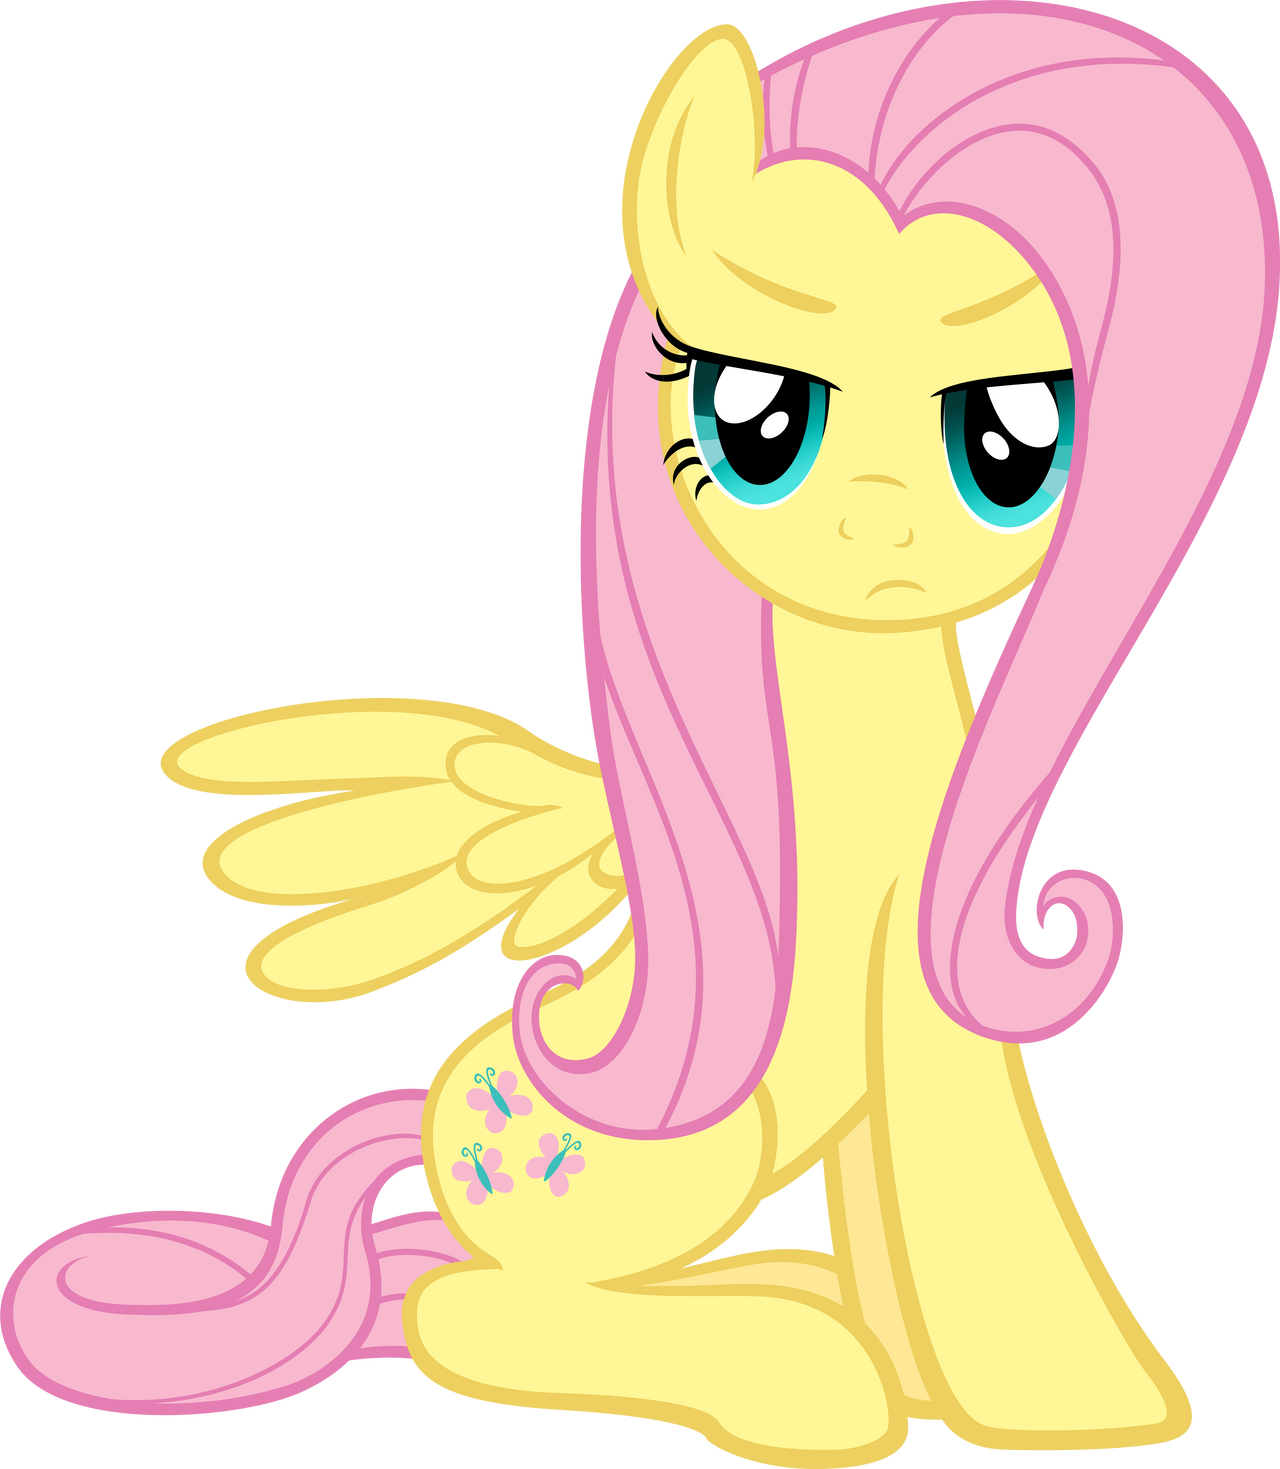 fluttershy___bridlemaid_by_moongazeponies-d3kd5zc.png